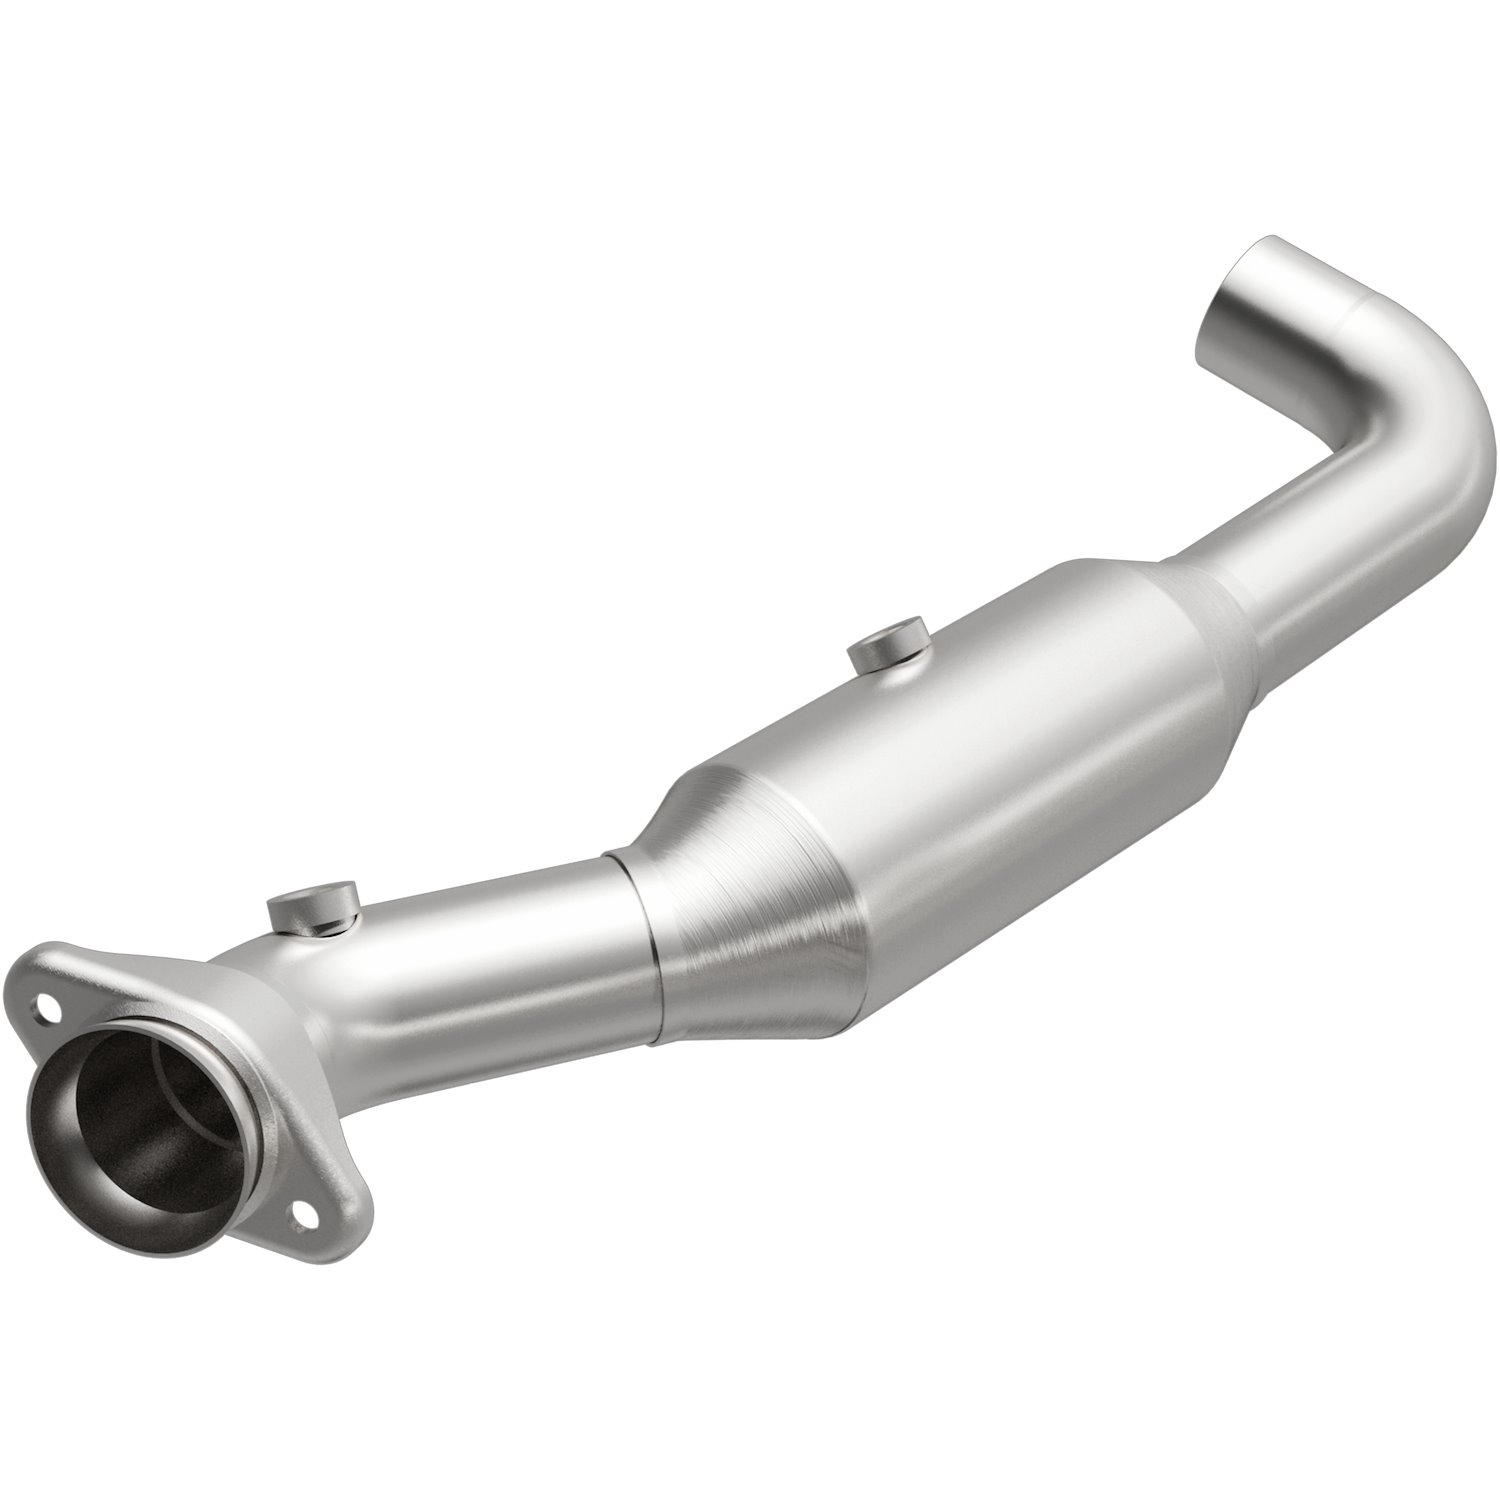 2009-2010 Ford F-150 California Grade CARB Compliant Direct-Fit Catalytic Converter